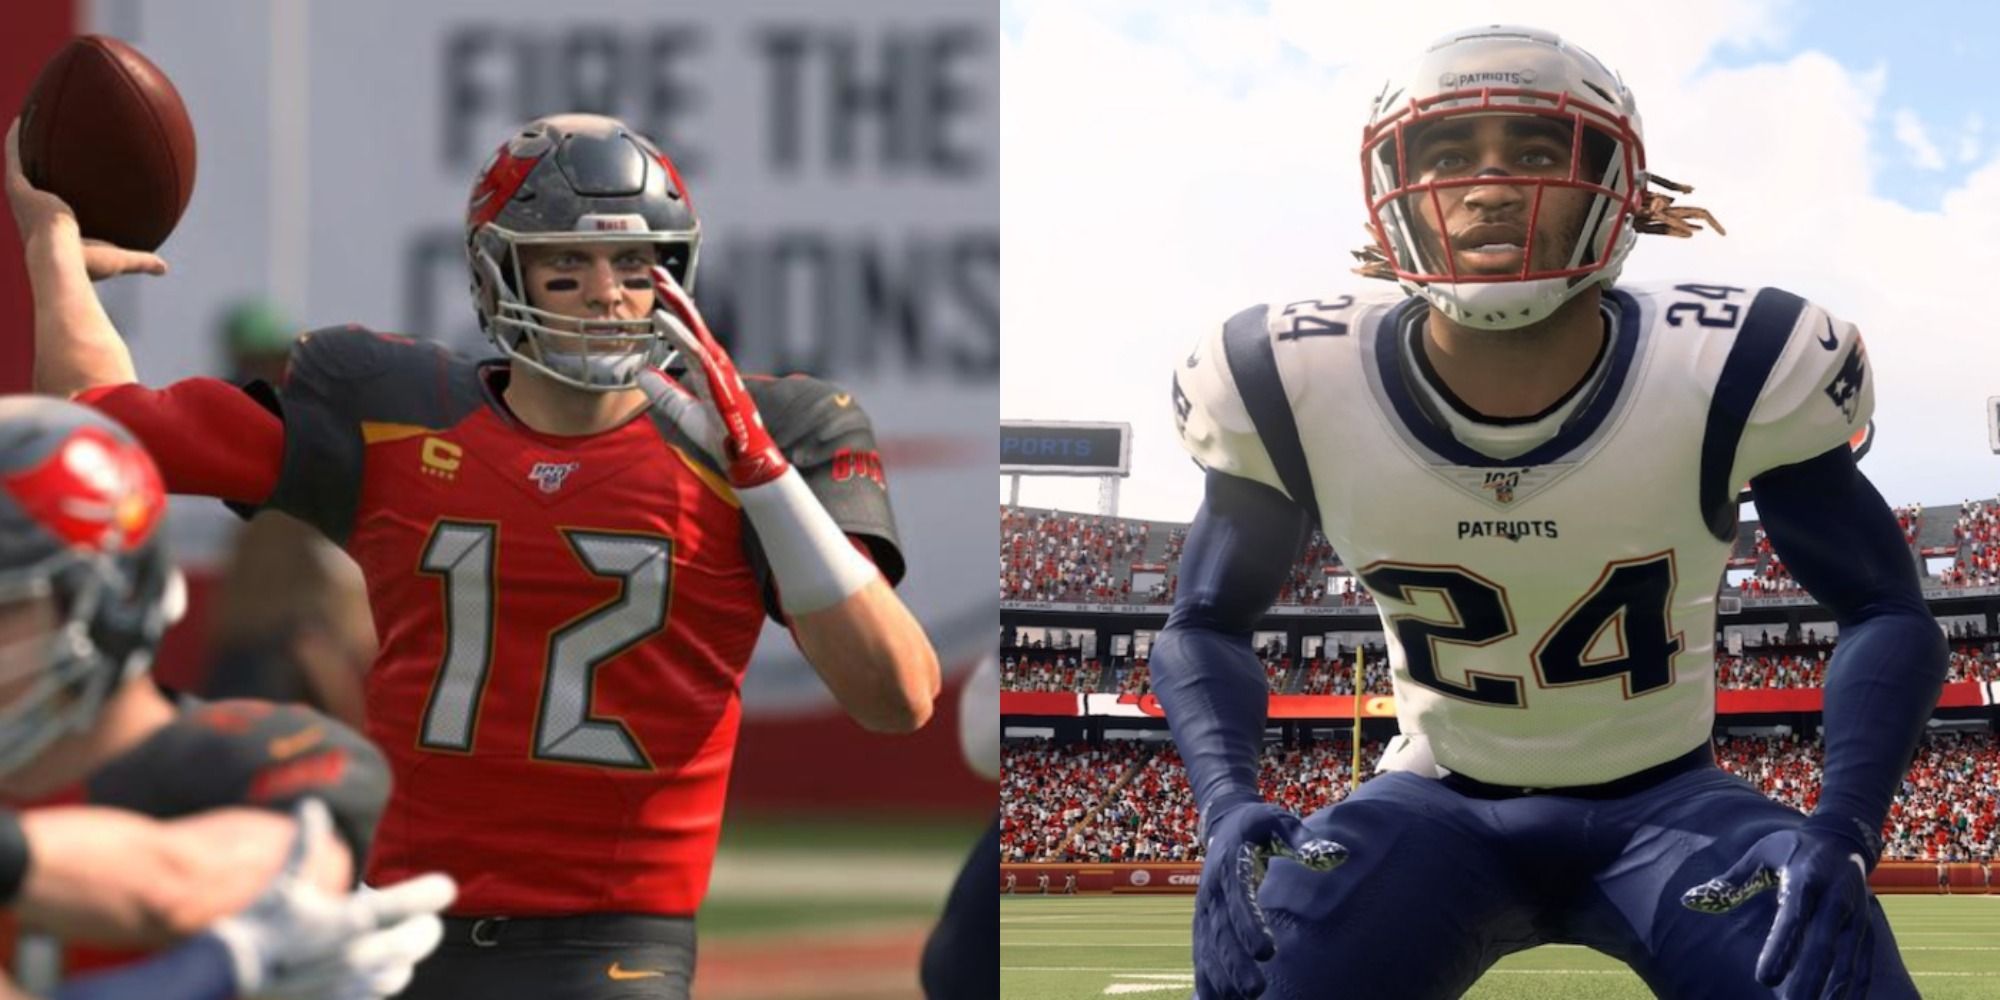 NFL players Tom Brady and Stephone Gilmore in Madden 22.